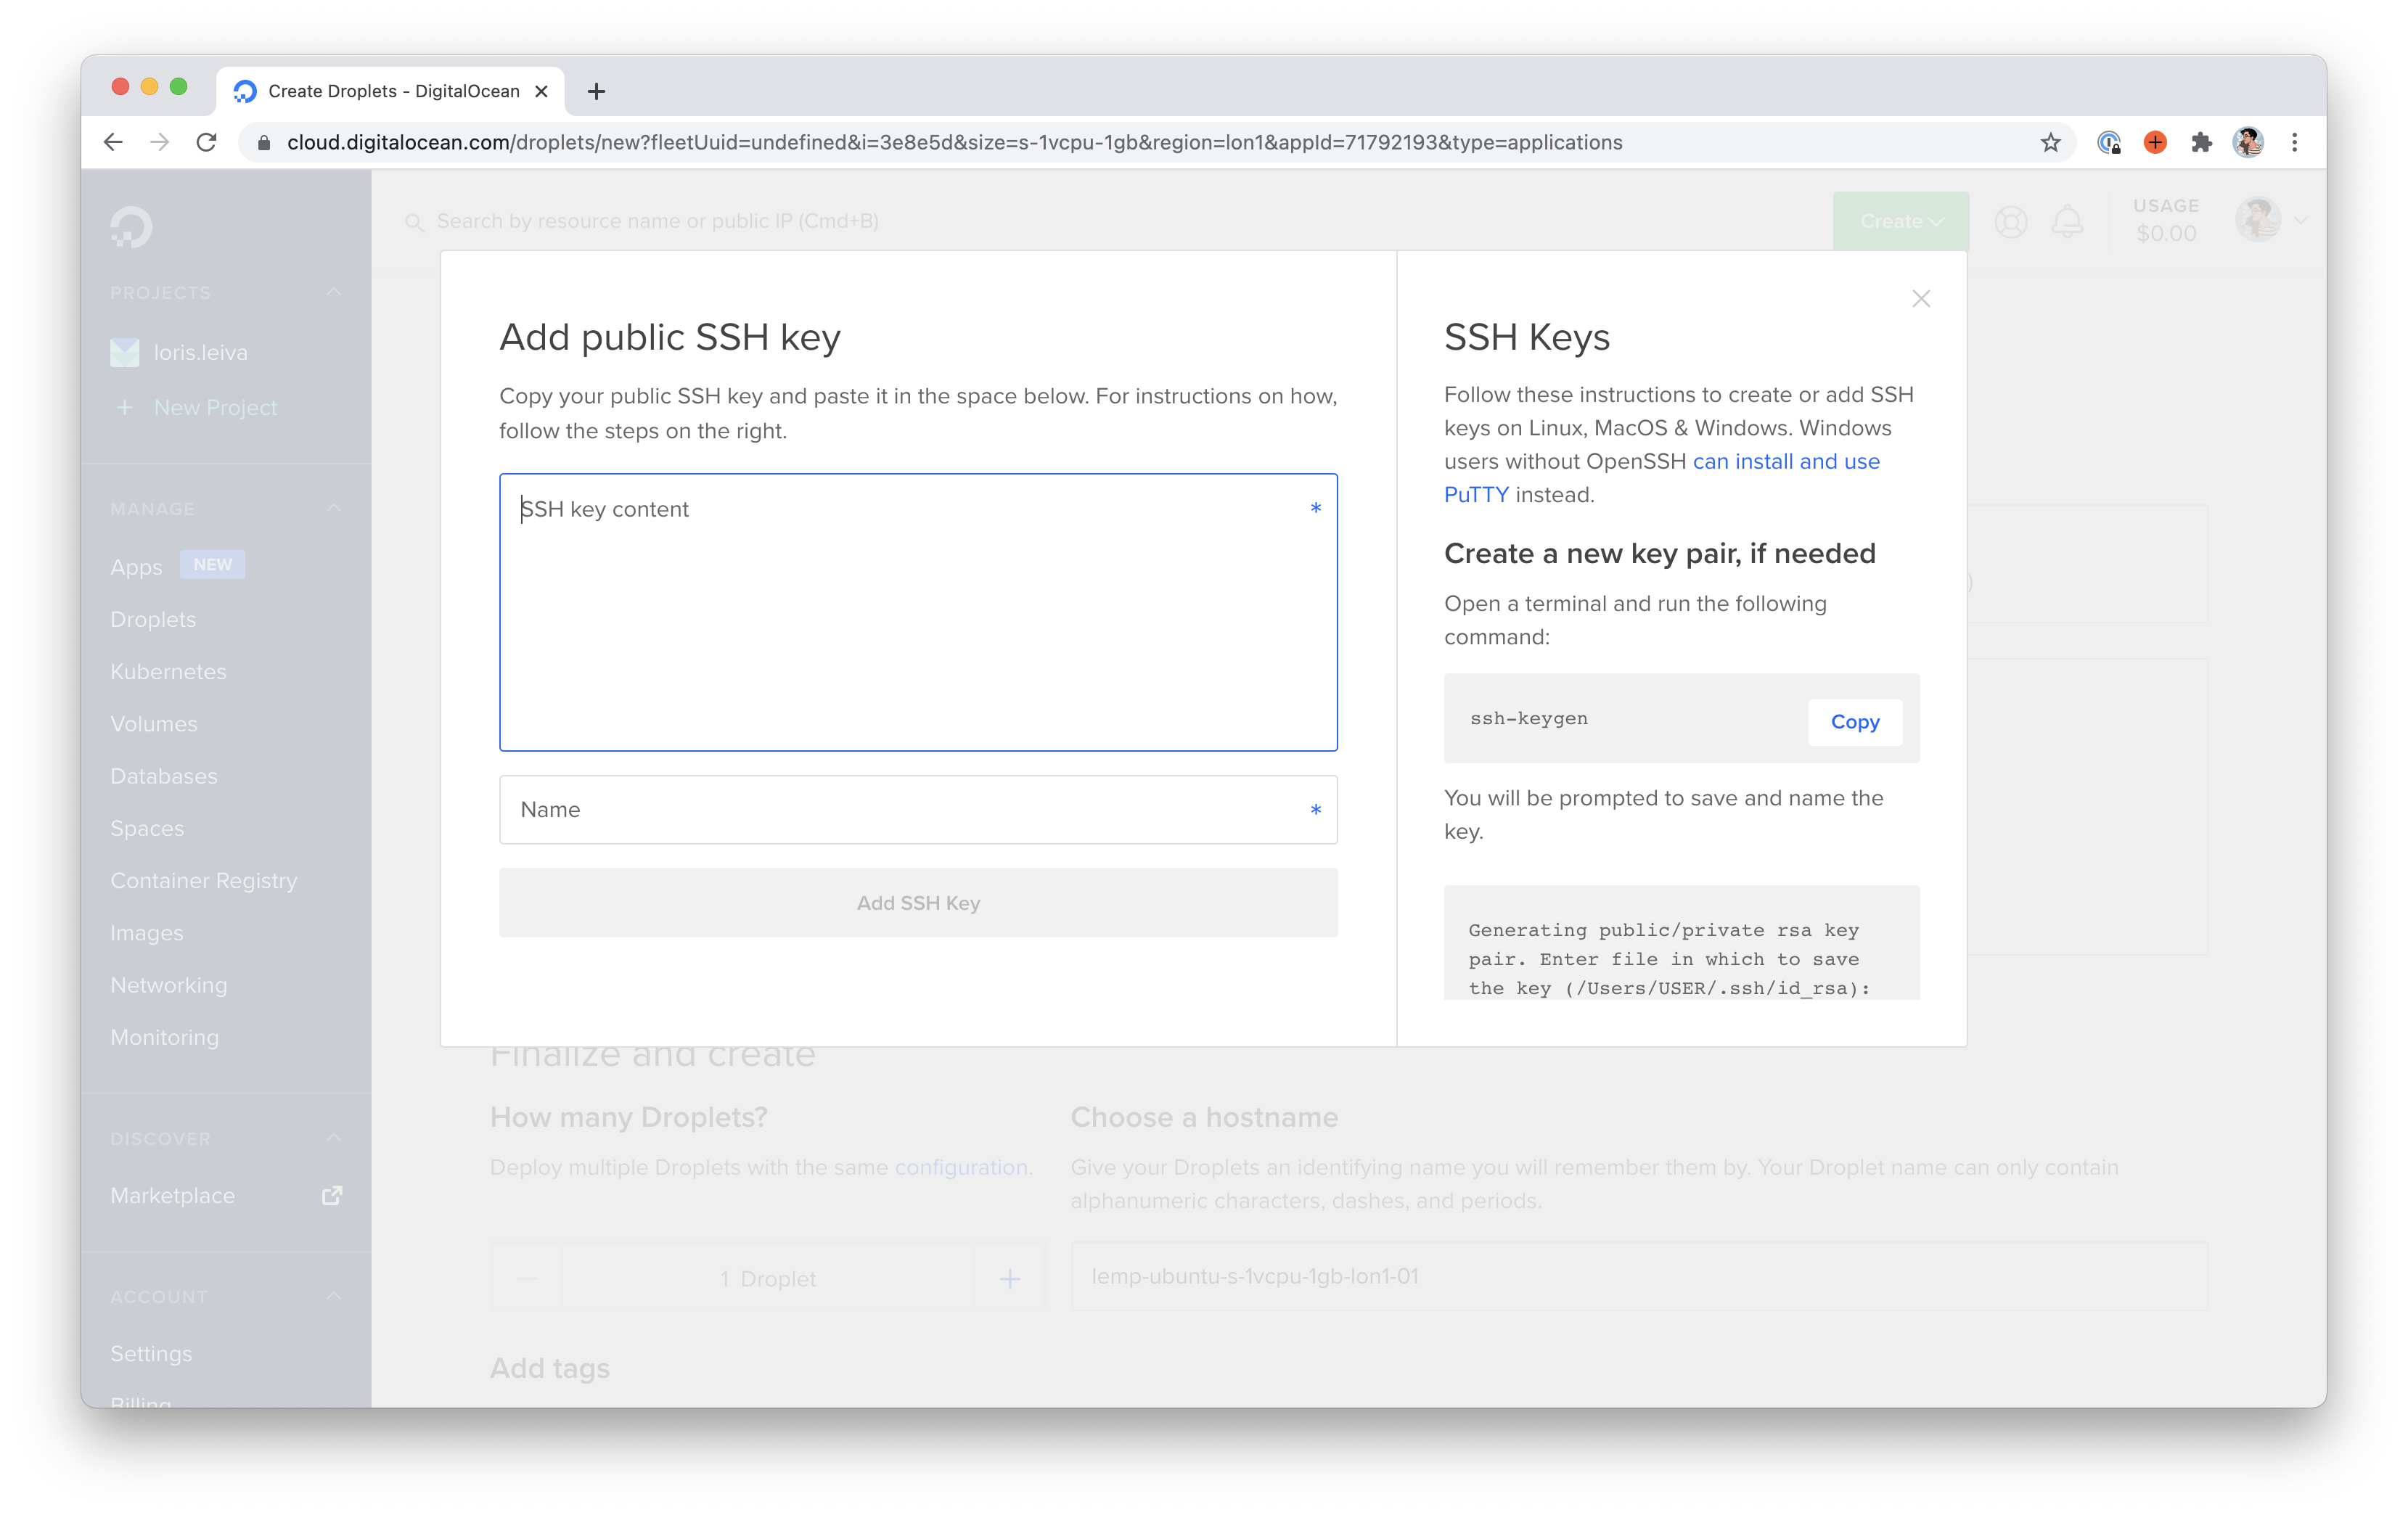 Screenshot of the modal used to create a new SSH key.